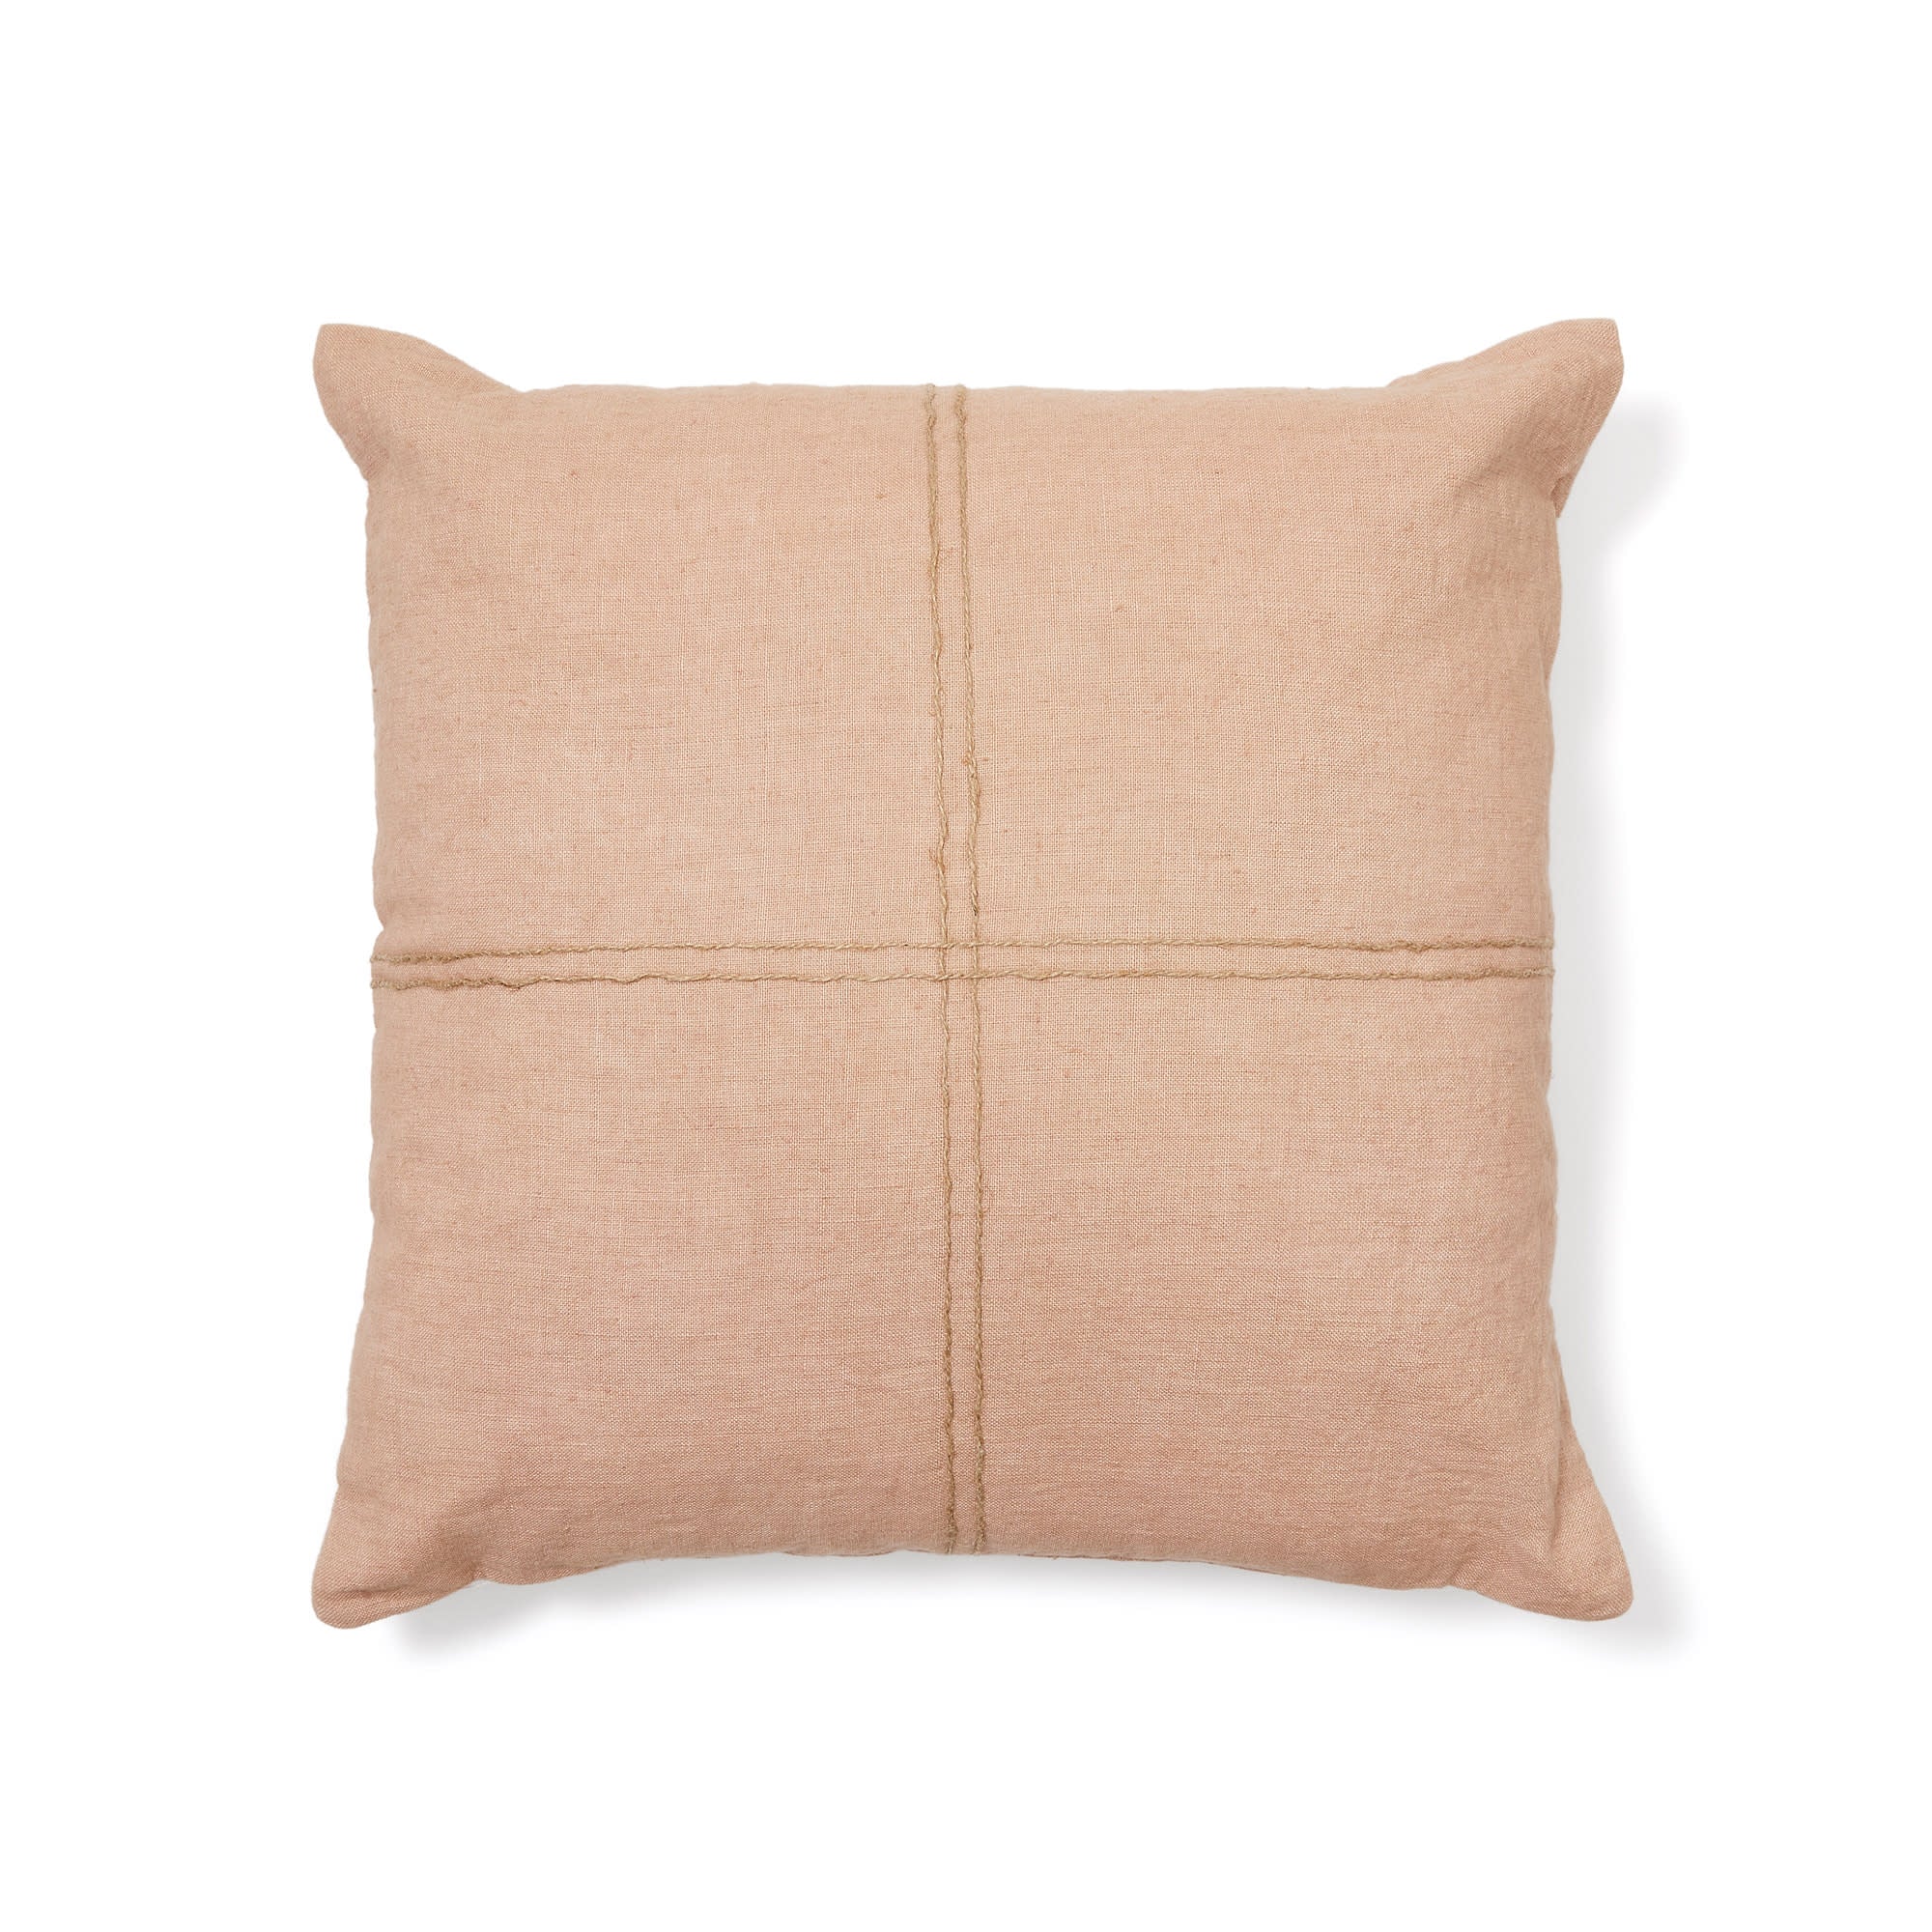 Sulken cushion cover made of pink linen and beige embroidery, 45 x 45 cm